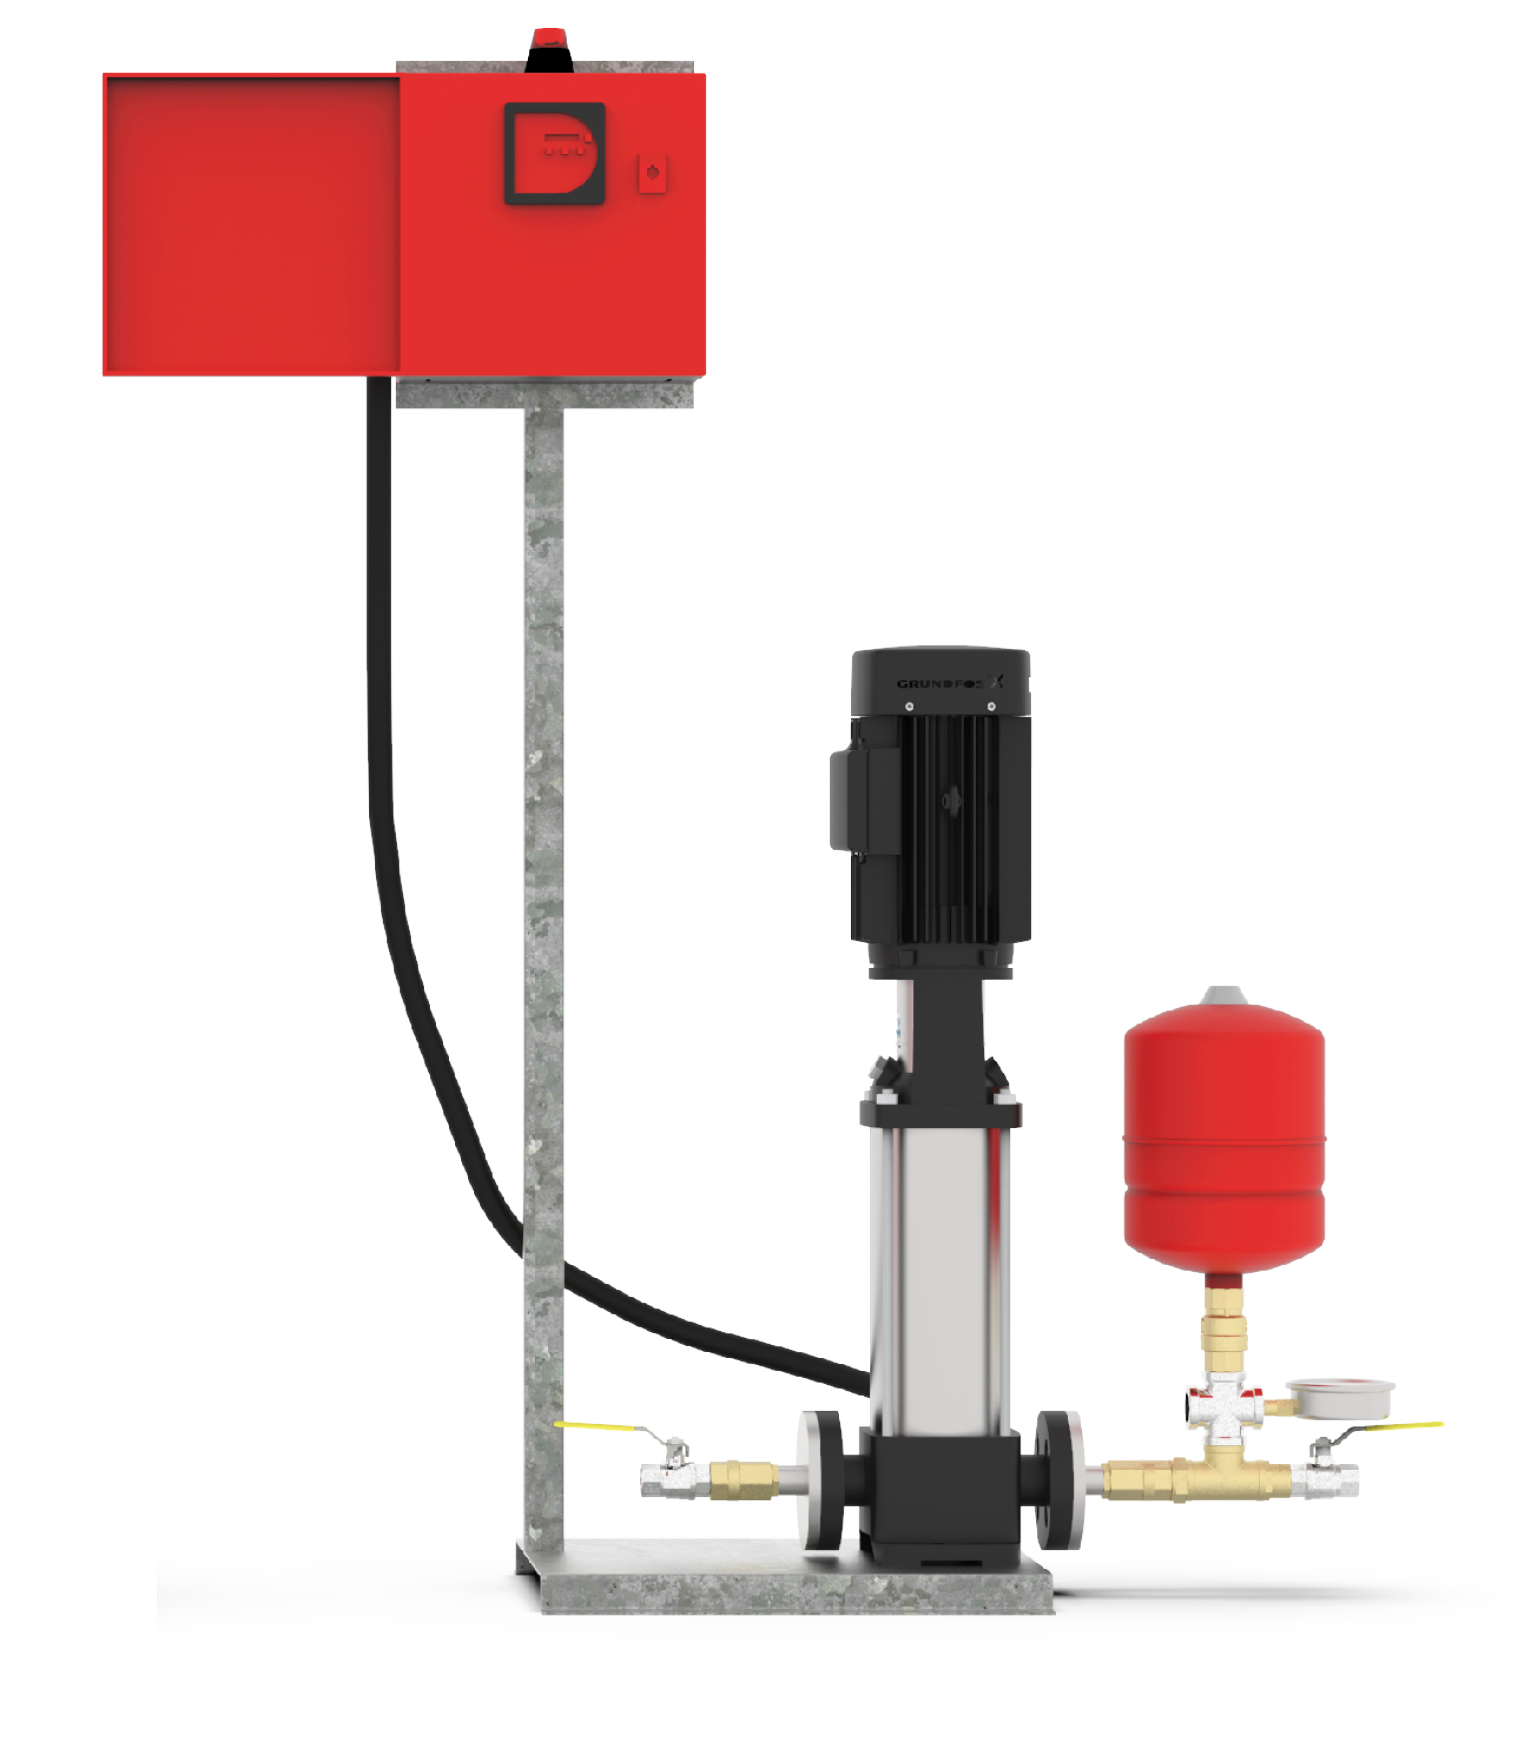 Jacking pumpsets designed for robust fire hydrant pump systems